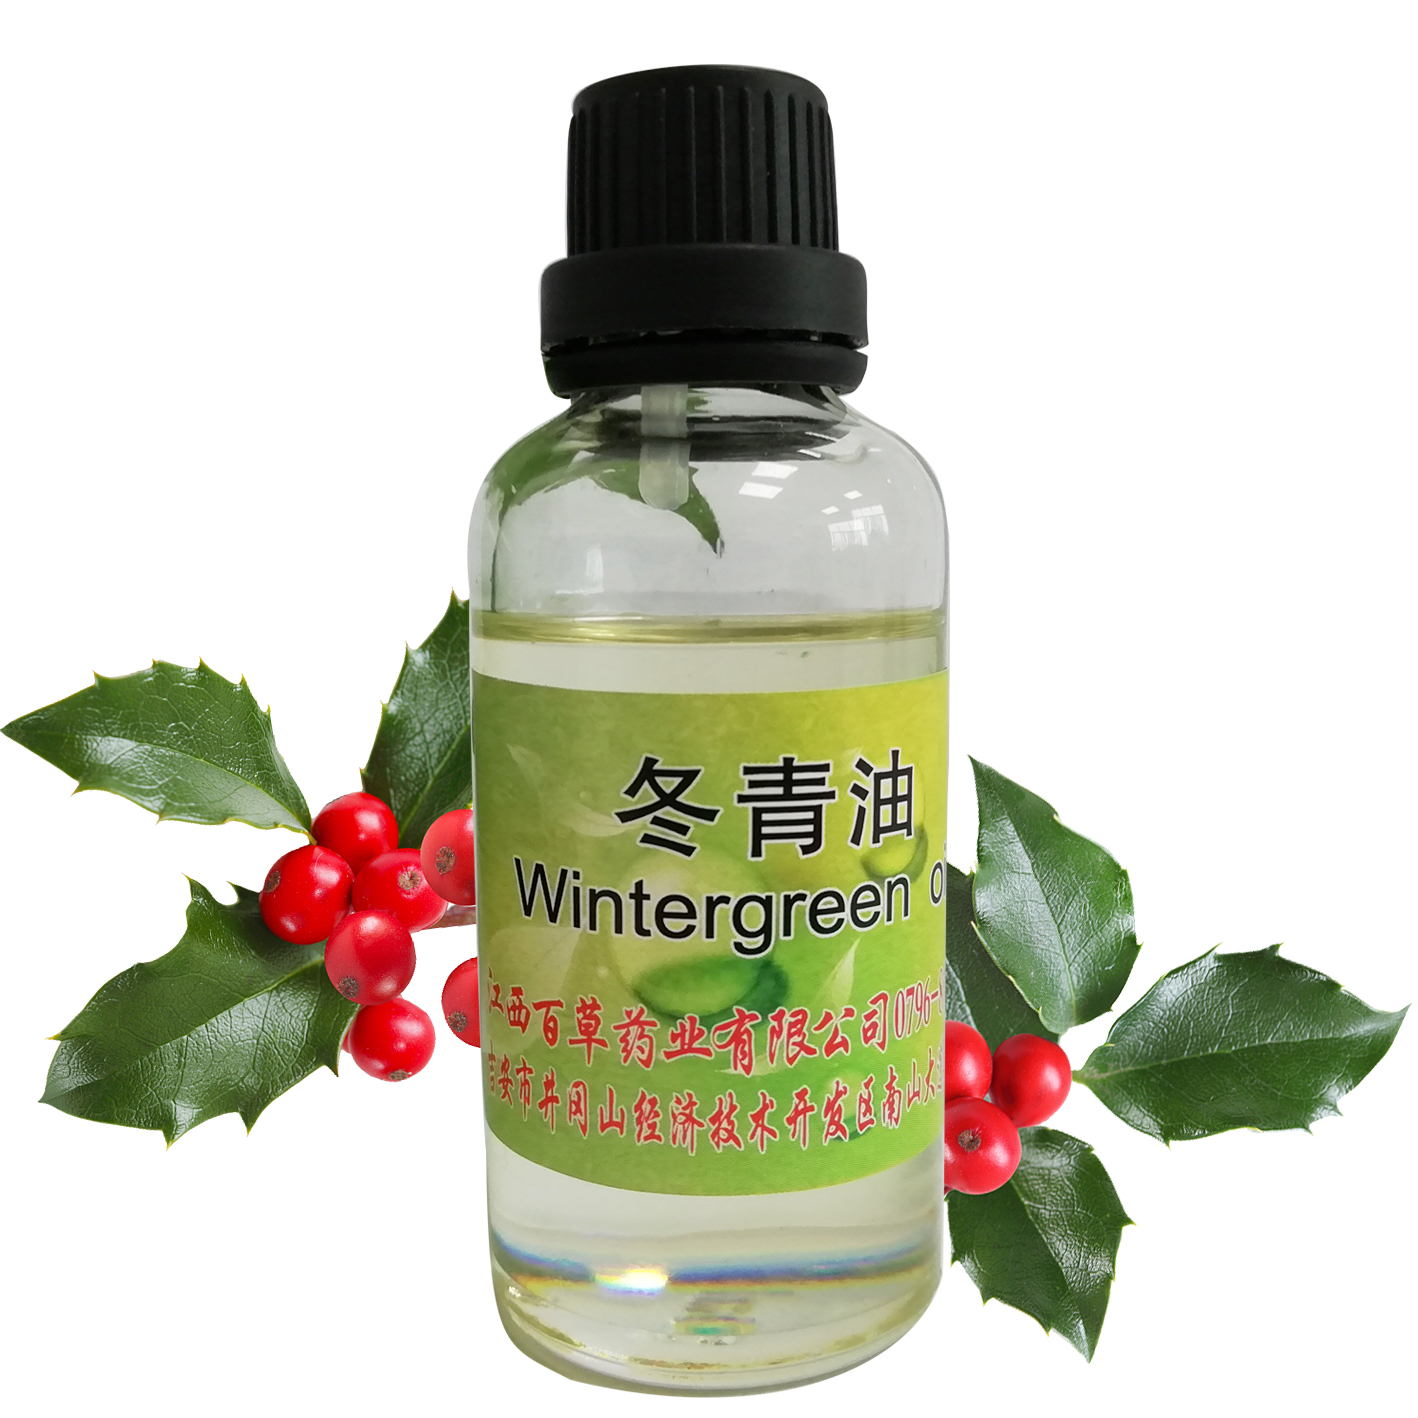 Wintergreen oil for skincare and health products Featured Image